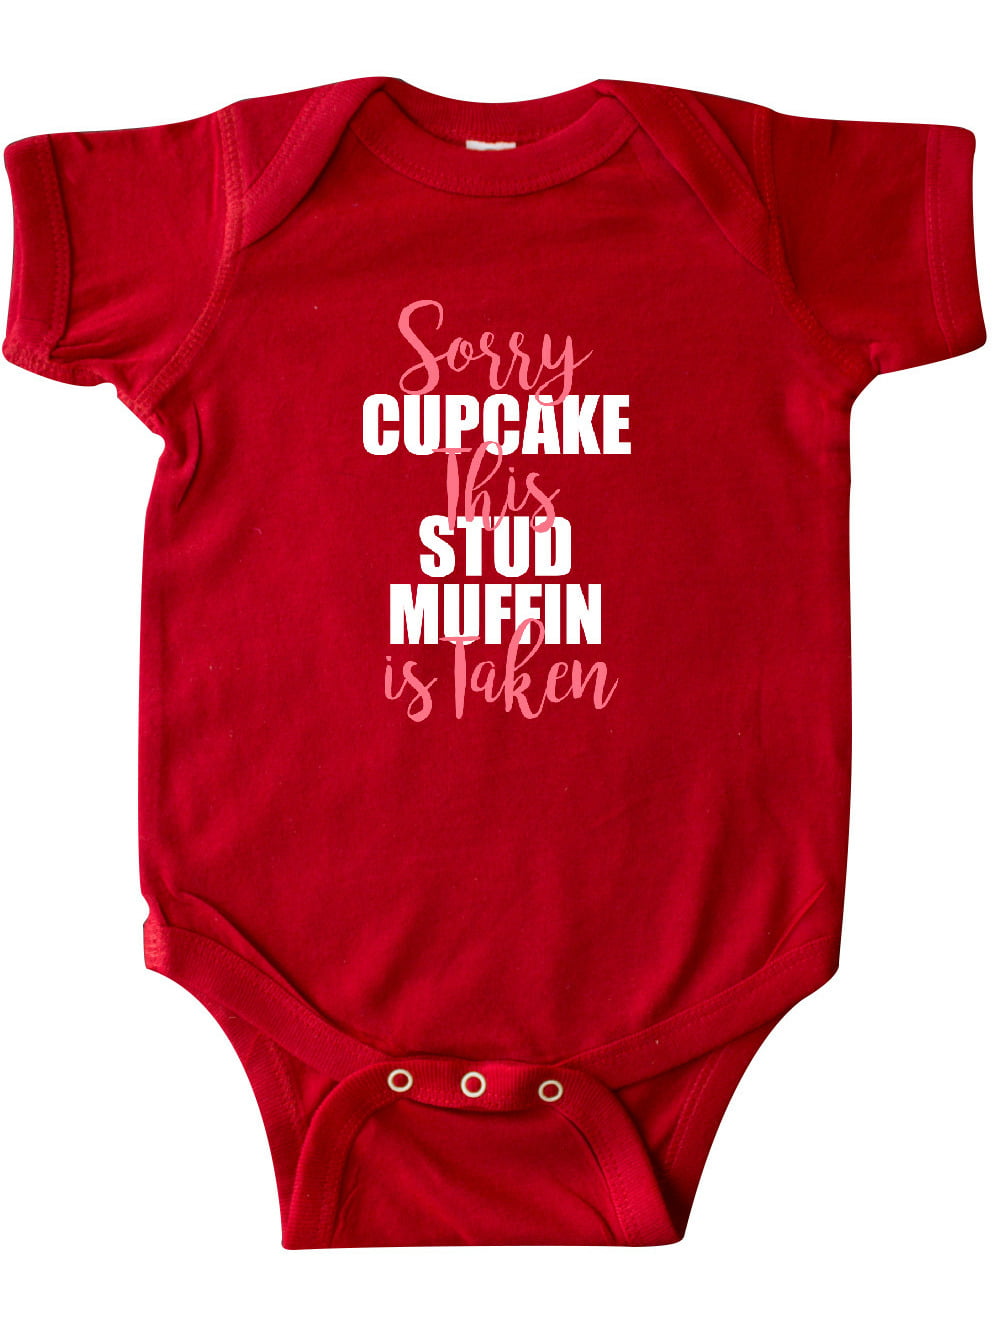 Cool Boy Girl Stud Muffin One-Piece Snapsuit Funny Baby Romper Cotton 